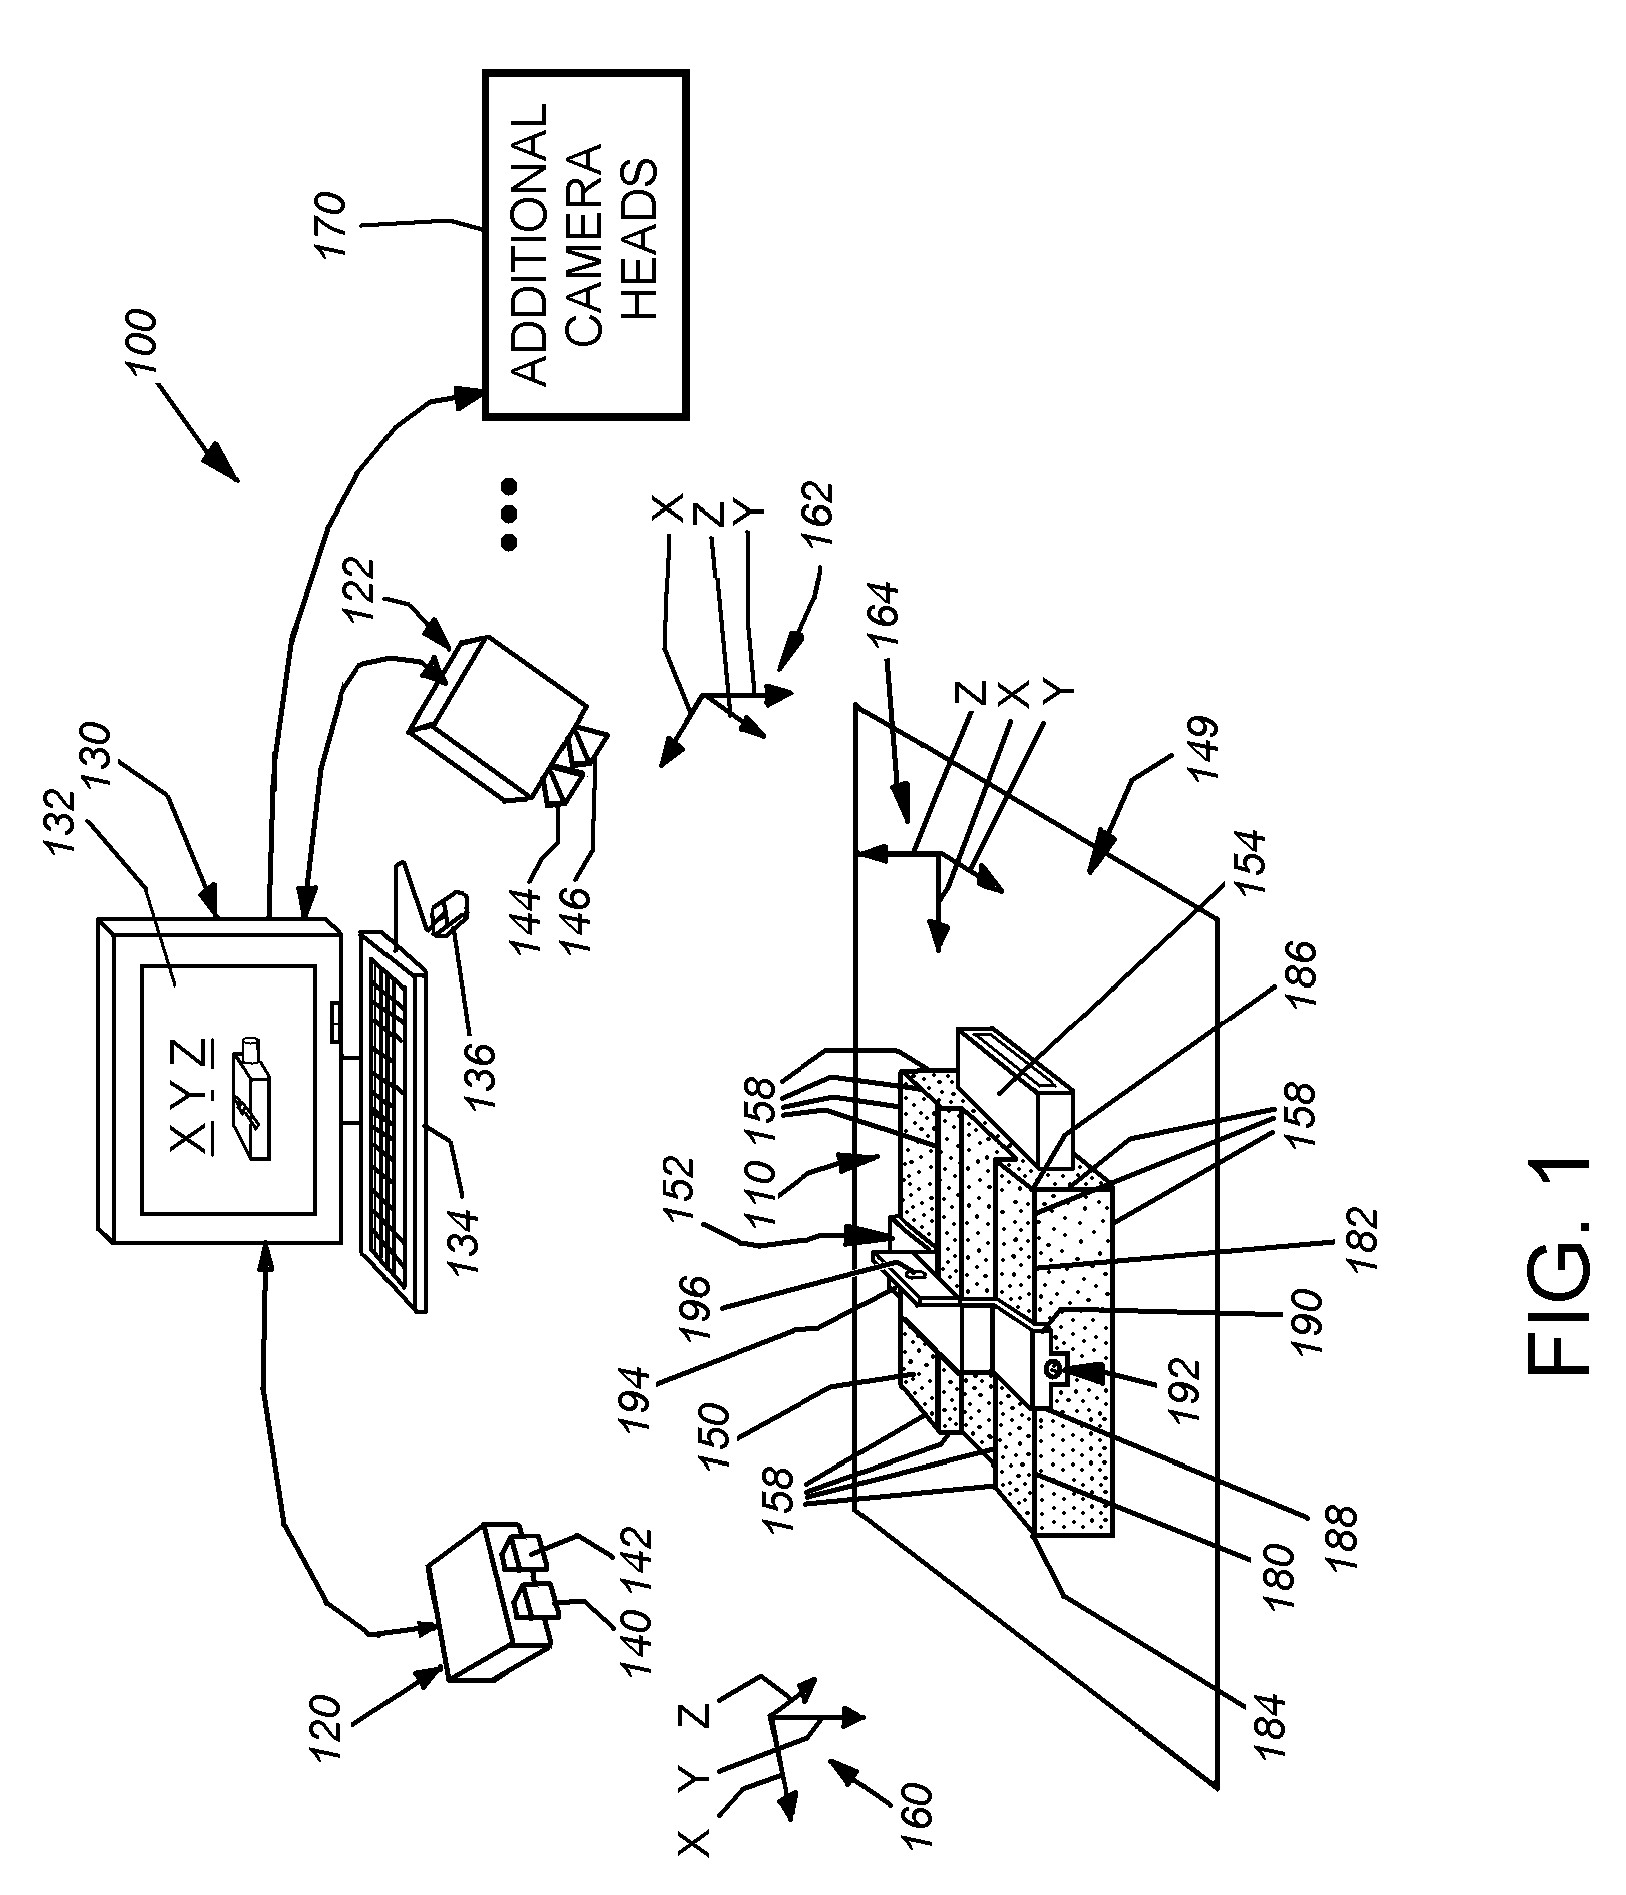 System and method for three-dimensional alignment of objects using machine vision